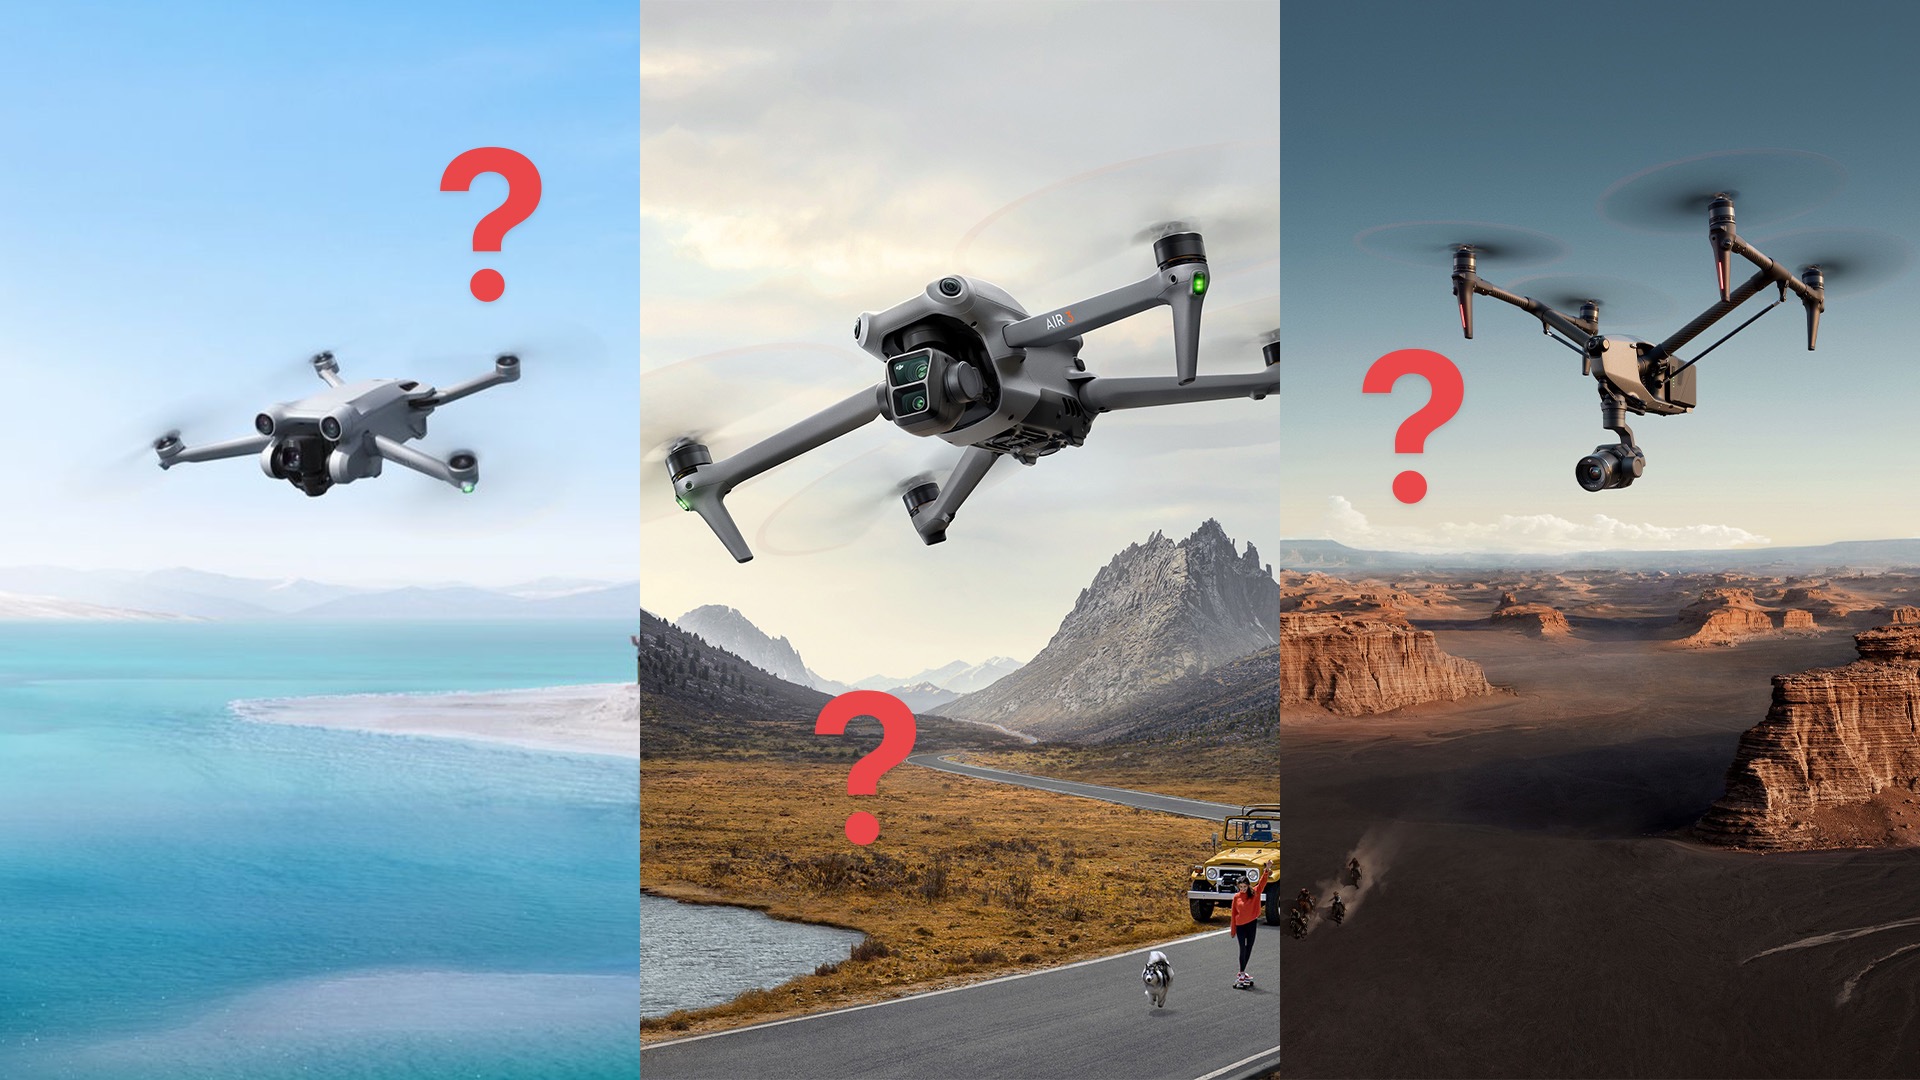 DJI Air 2S: Features, specs, price, and release date - DroneDJ